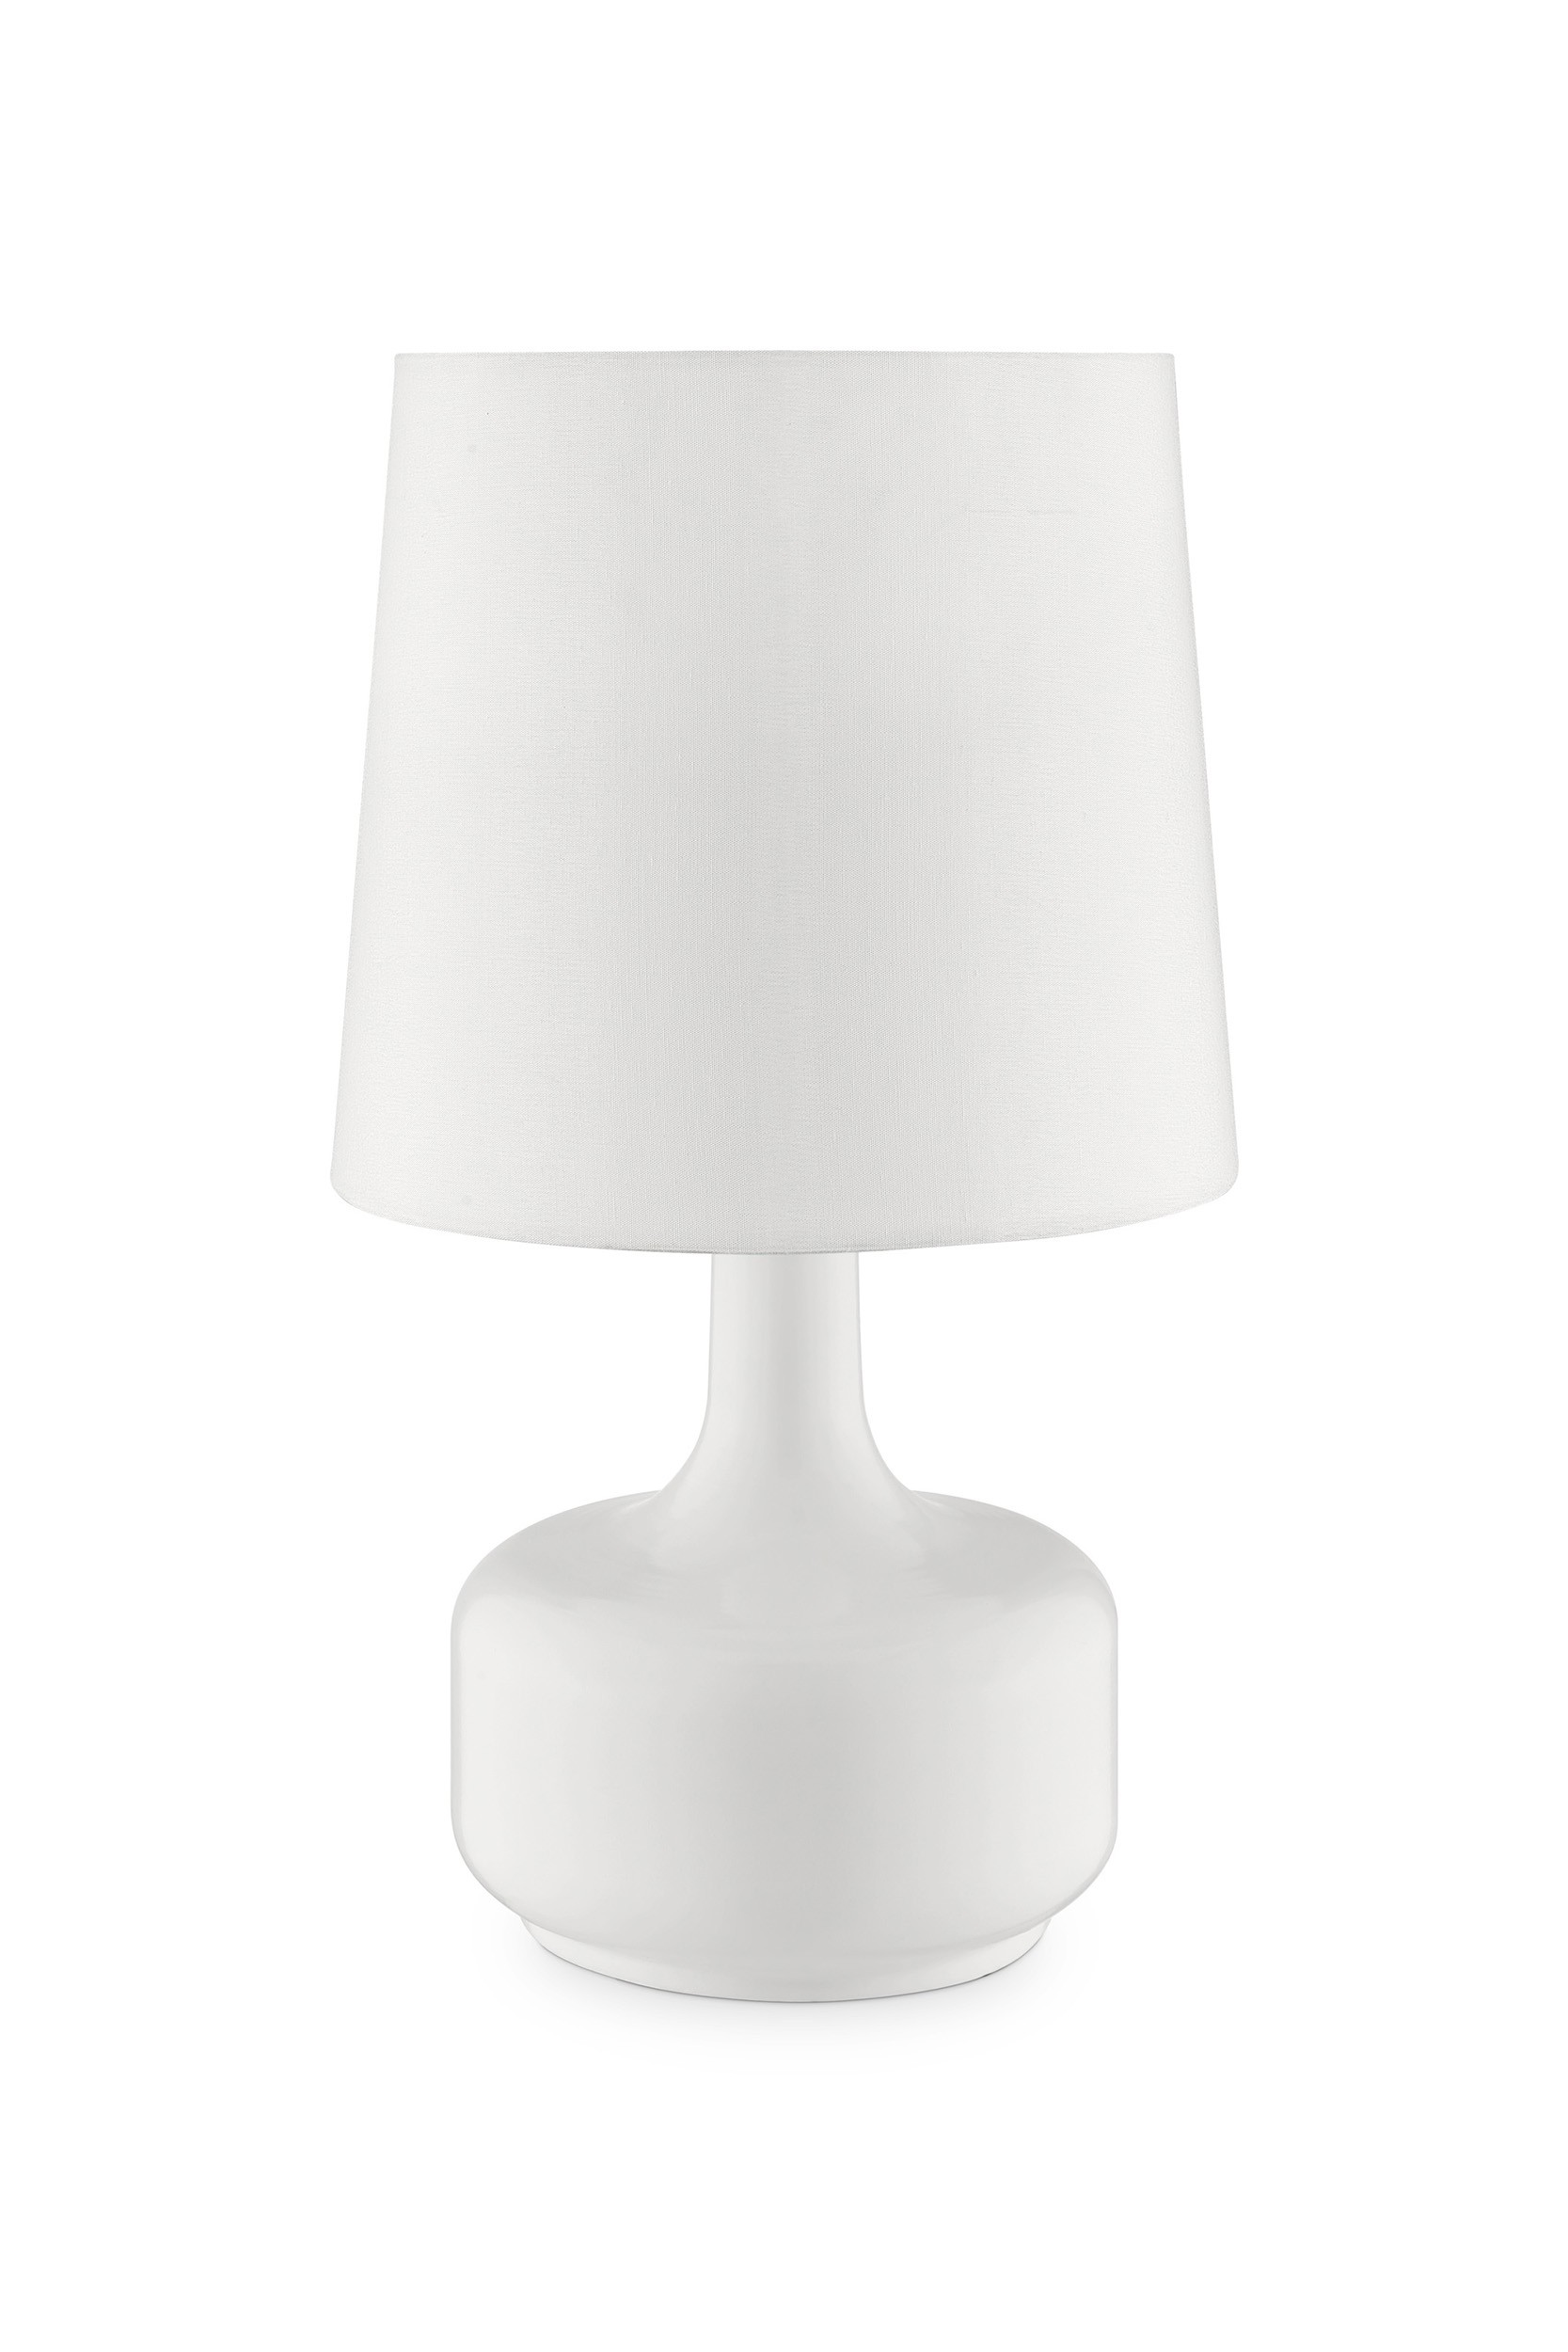 17" White Metal Bedside Table Lamp With Off-White Shade-468691-1